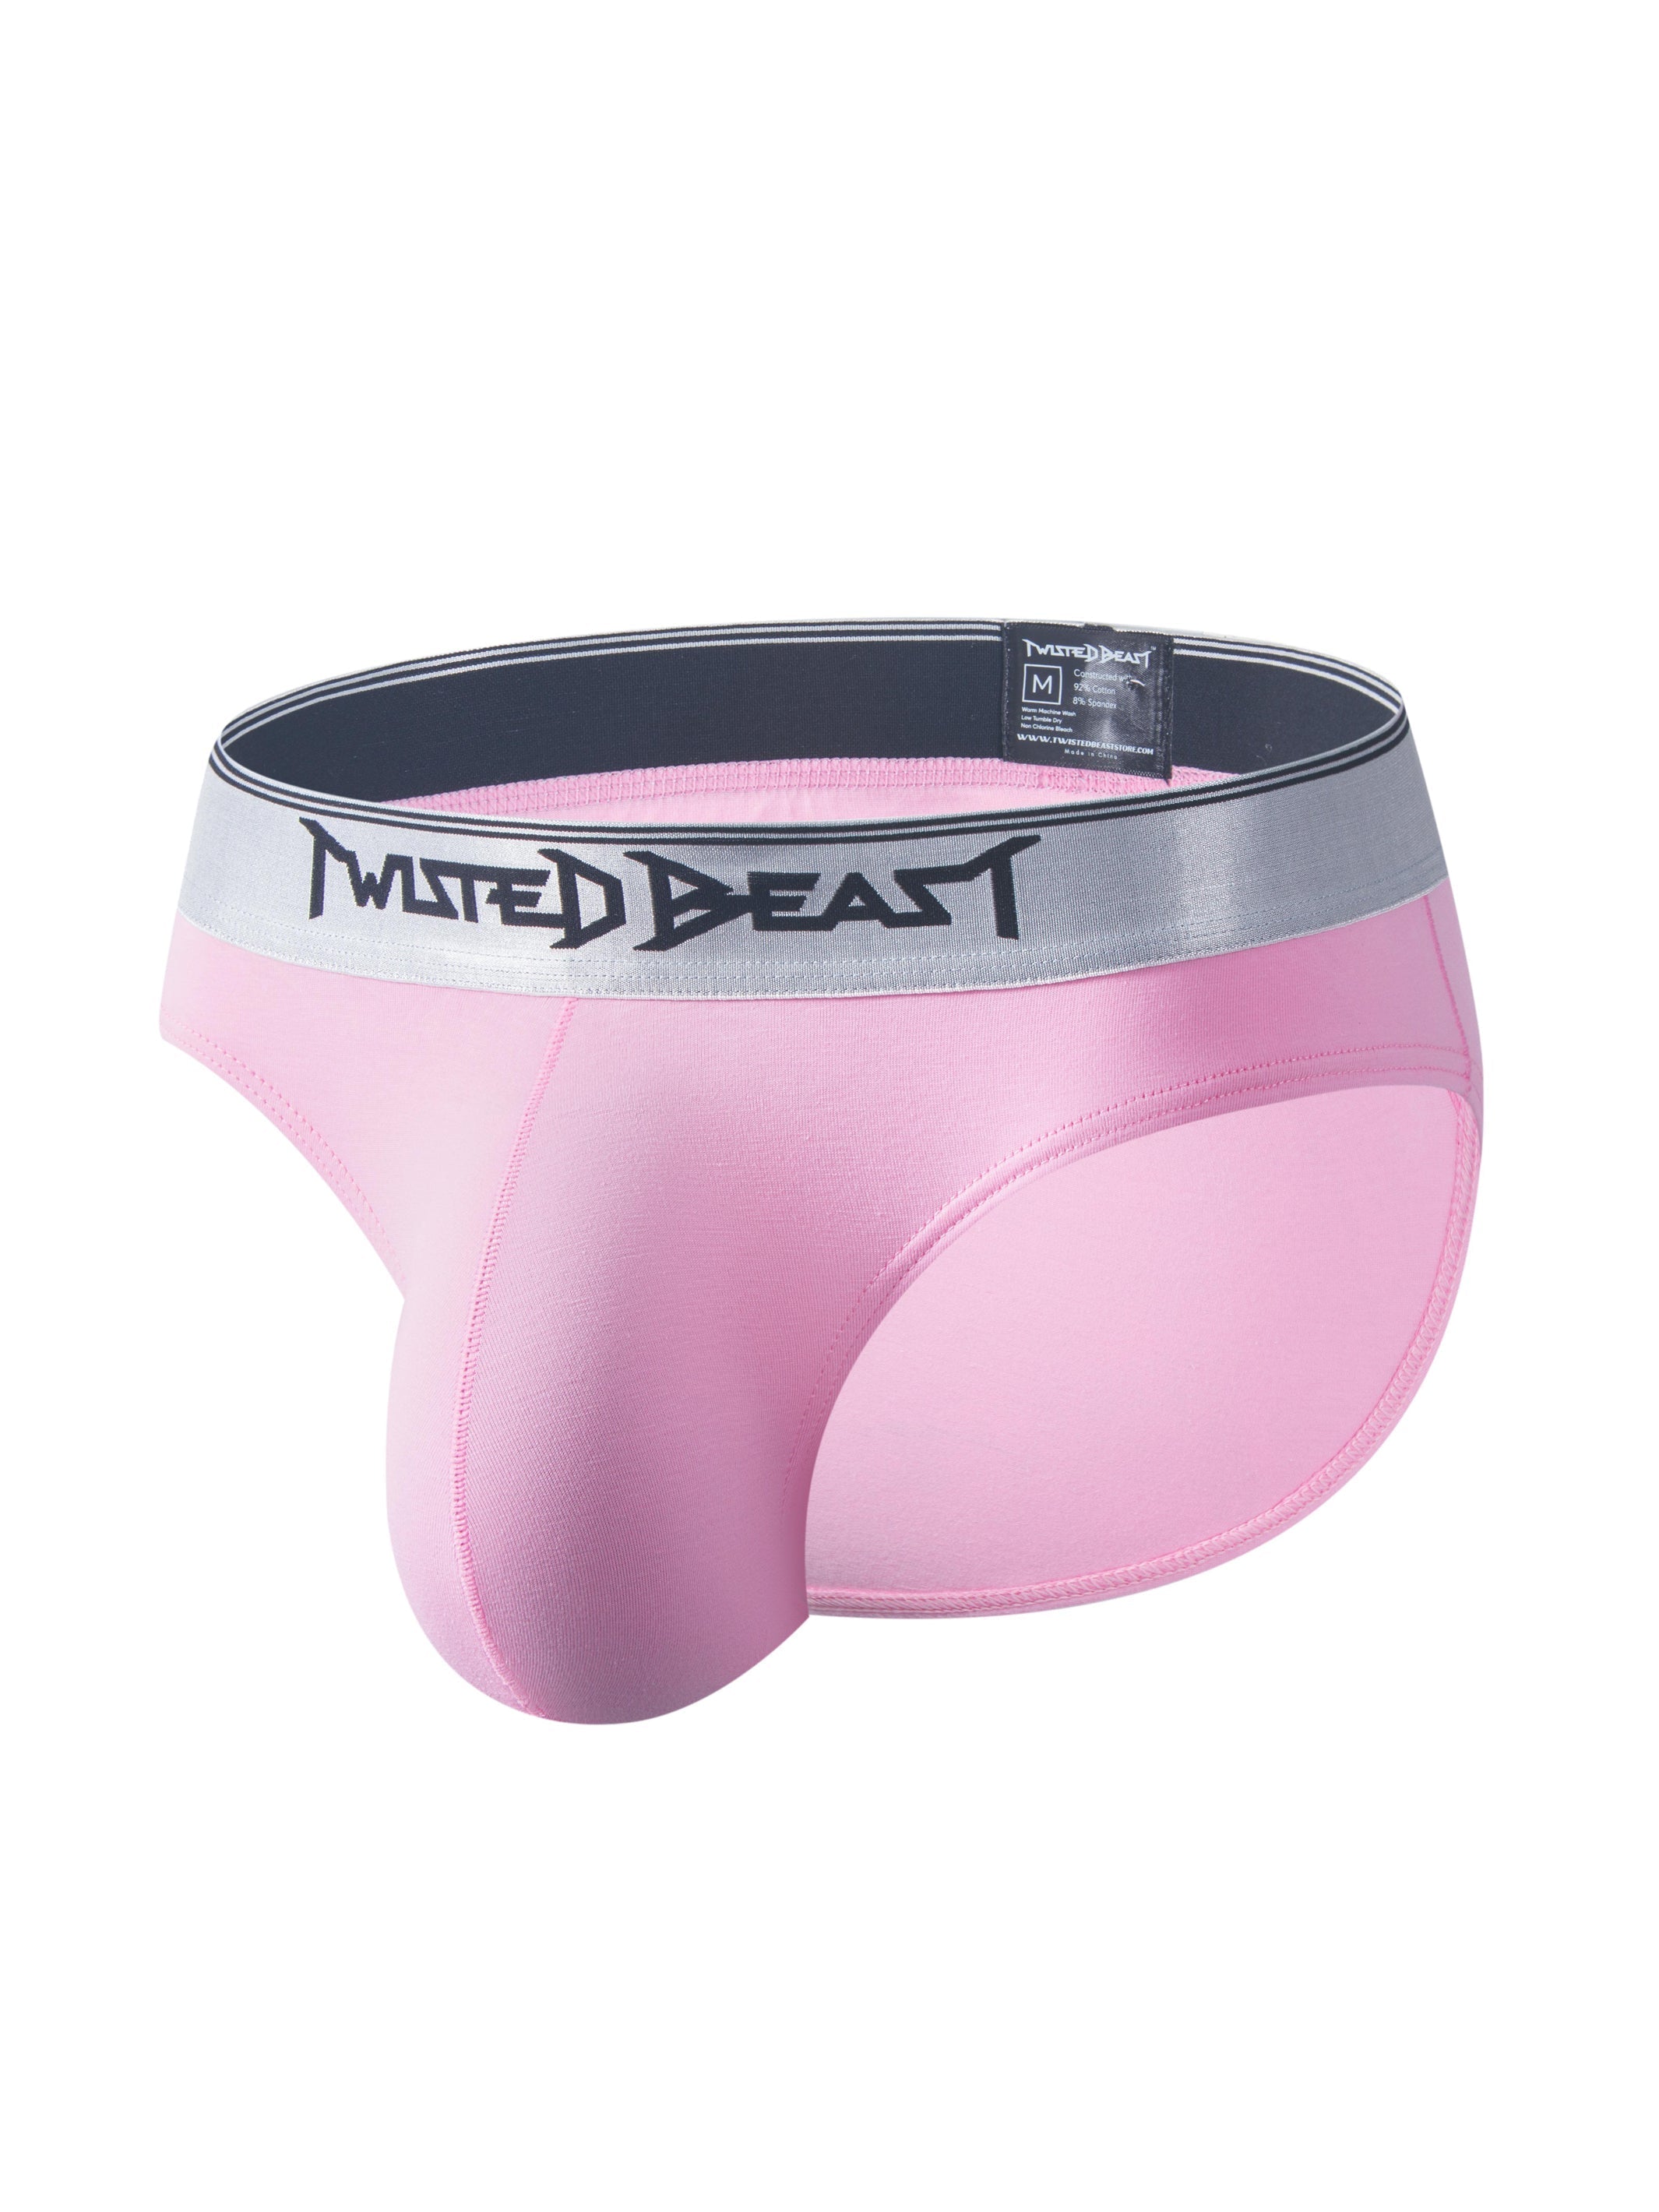 A pair of pink Y2K Briefs by Twisted Beast.